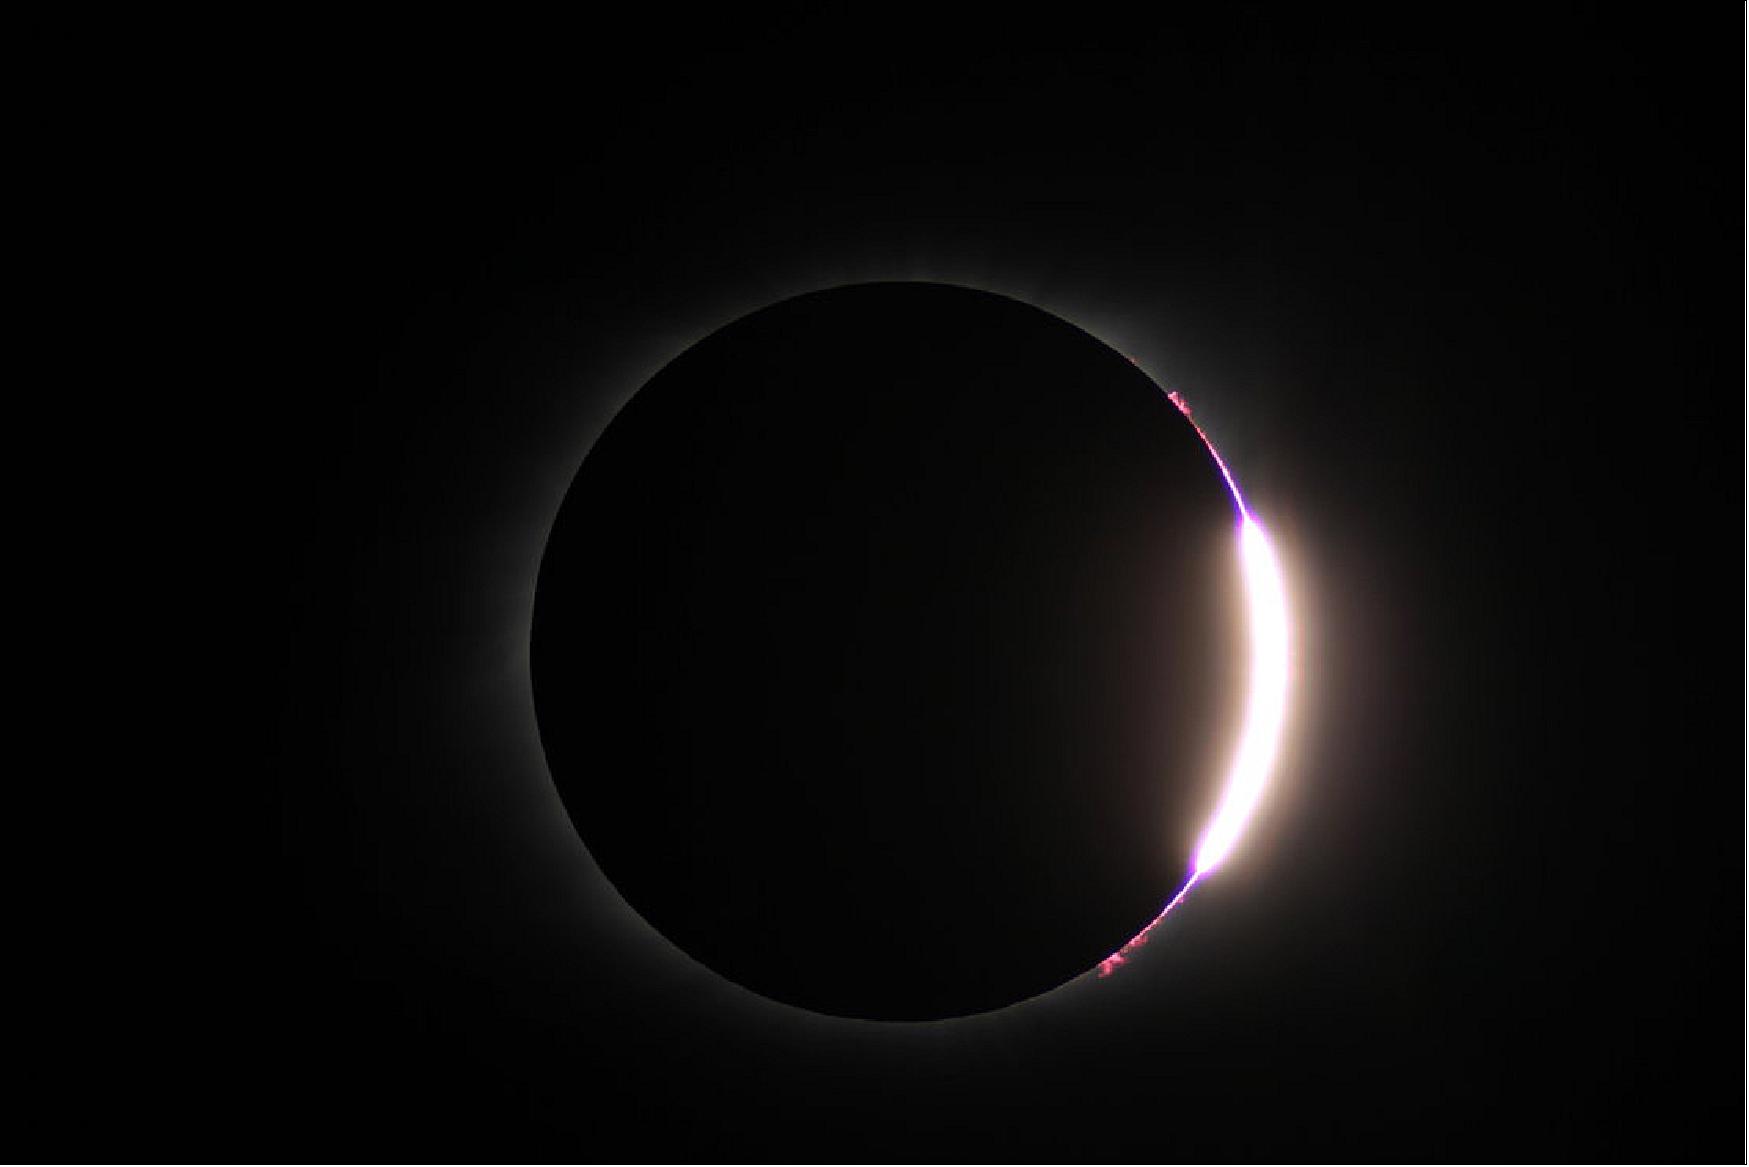 Figure 24: This snapshot was captured during an eclipse expedition to the USA as part of ESA's CESAR (Cooperation through Education in Science and Astronomy Research) educational initiative. CESAR engages students in the wonders of science and technology – astronomy in particular. The expedition team organized a special event on eclipse day, and delivered a broadcast including eclipse footage and talks with experts. Totality for the team occurred at precisely 10:42 local time in Casper, Wyoming (17:42 GMT); this image was taken moments after totality ended and the Moon continued along its path through the sky (image credit: ESA, CC BY-SA 3.0 IGO)